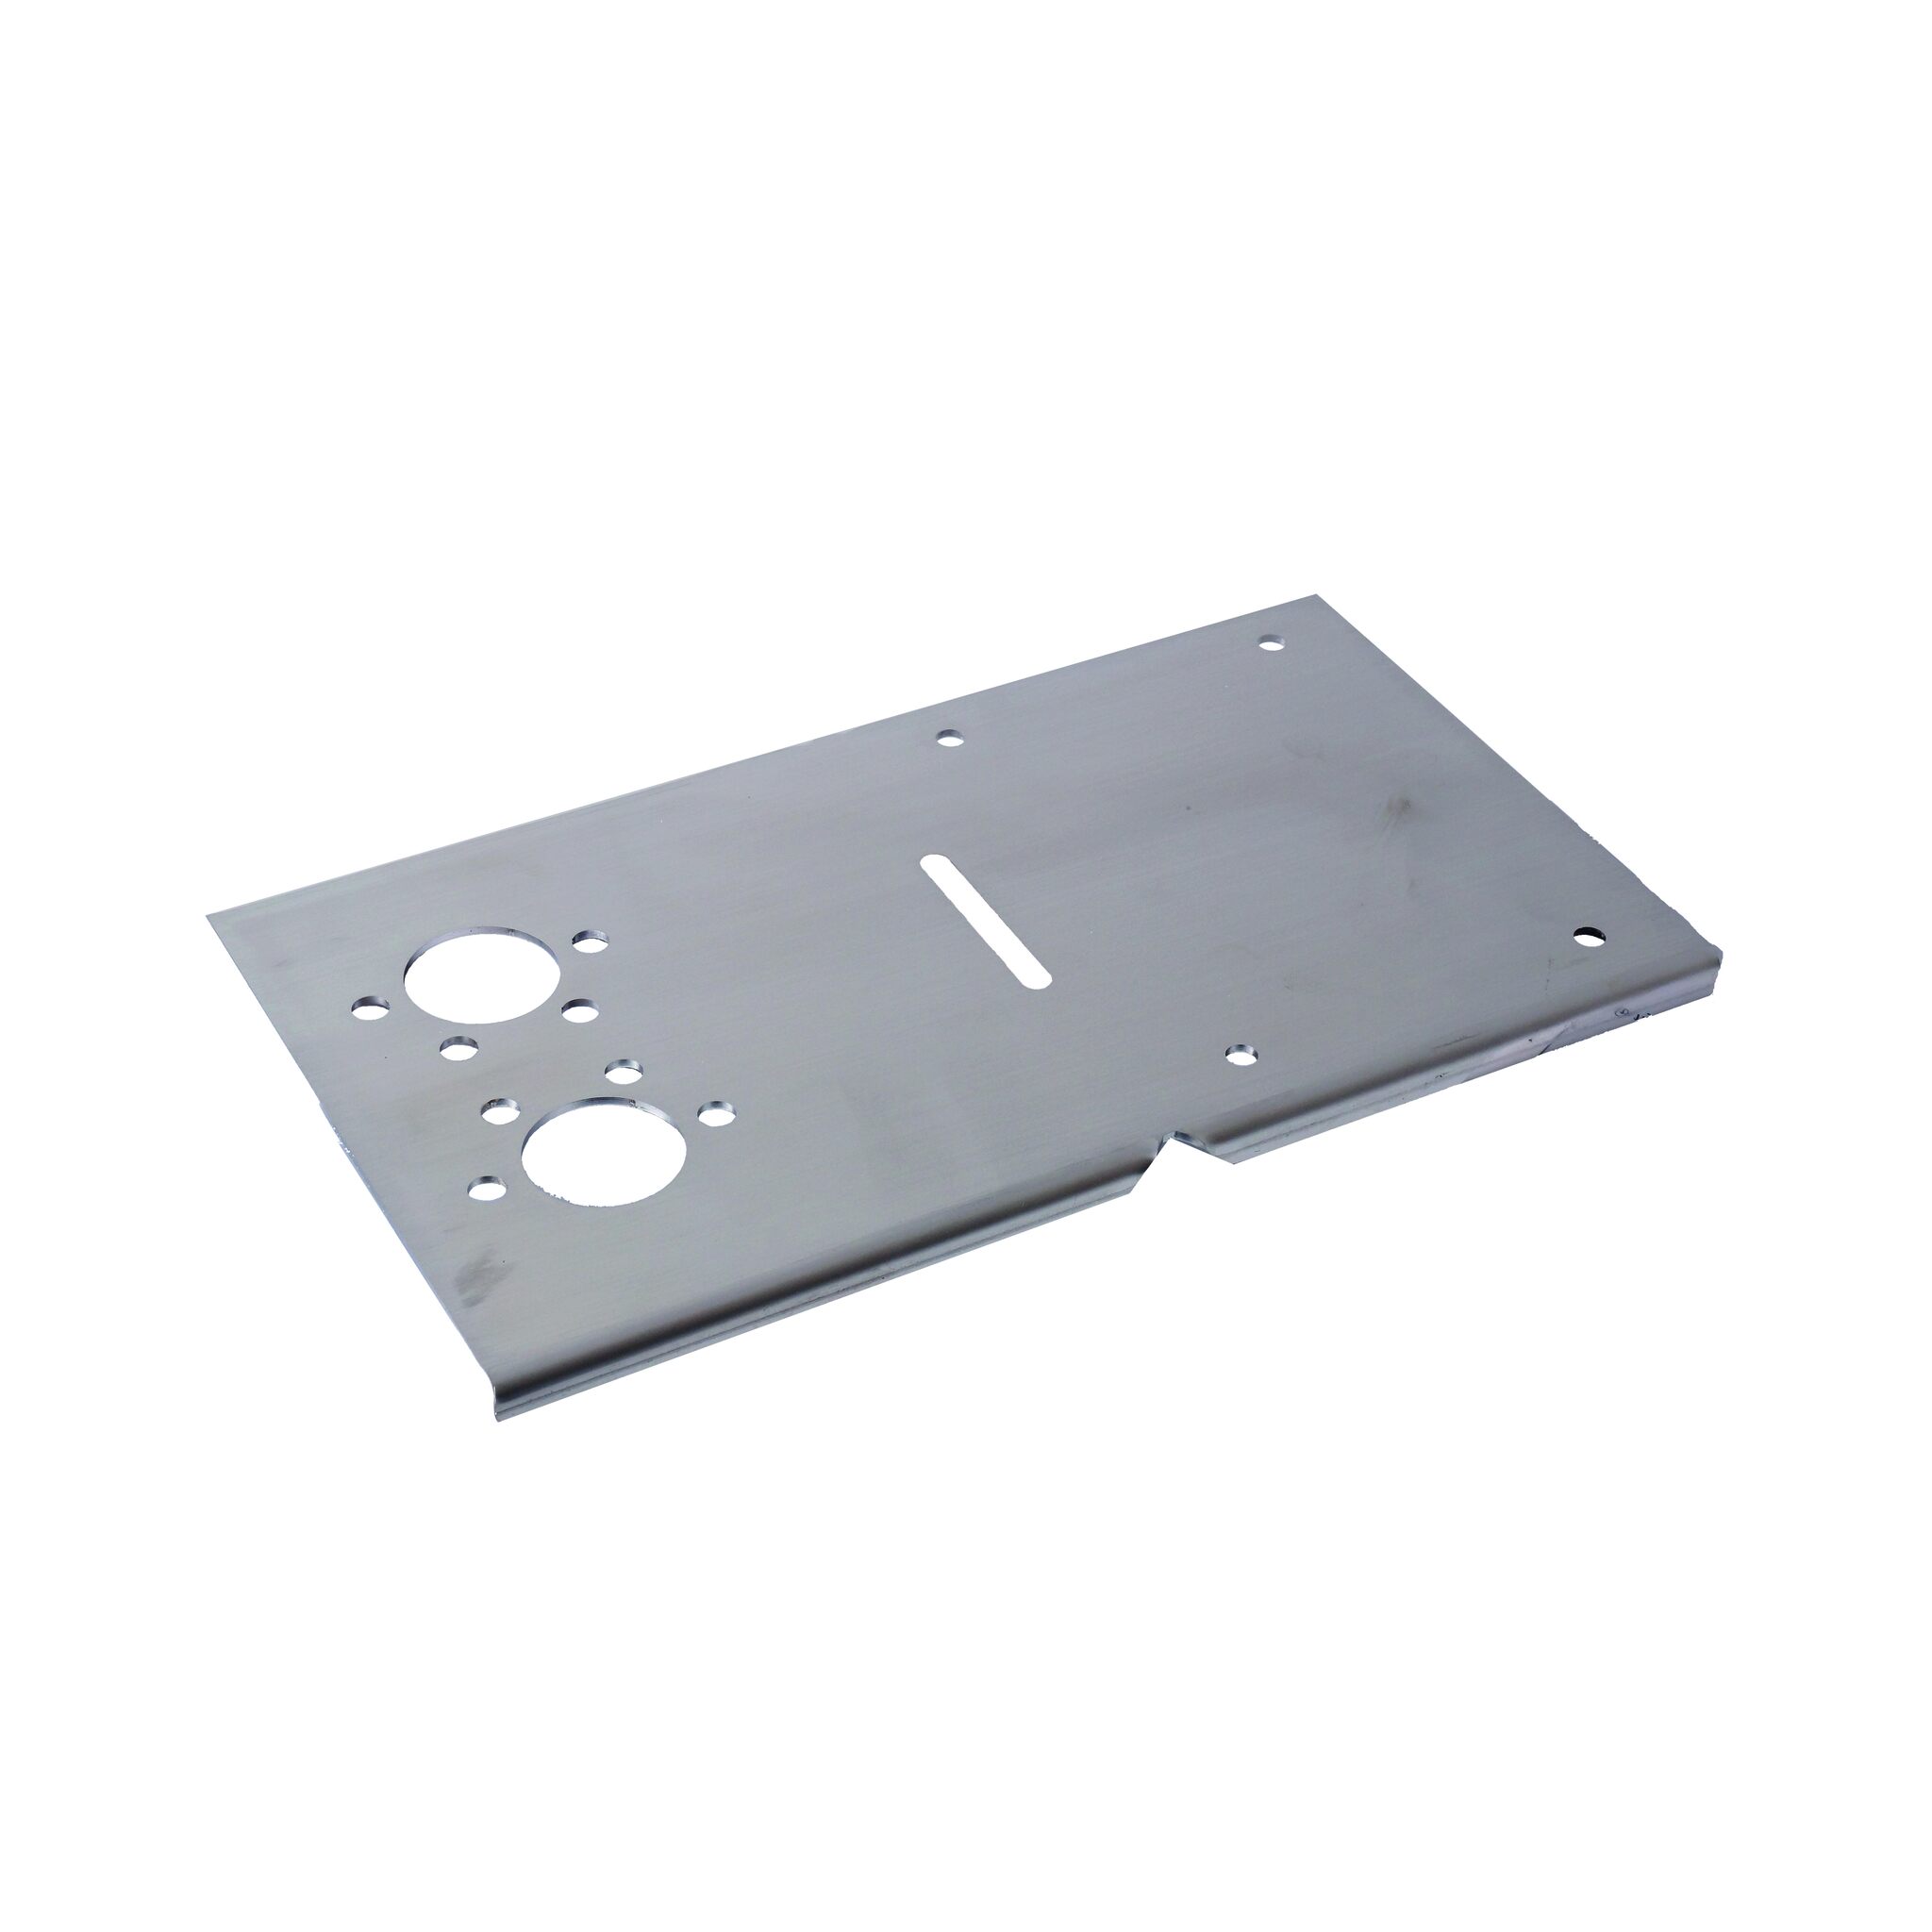 Mounting plate for diesel heaters, flat